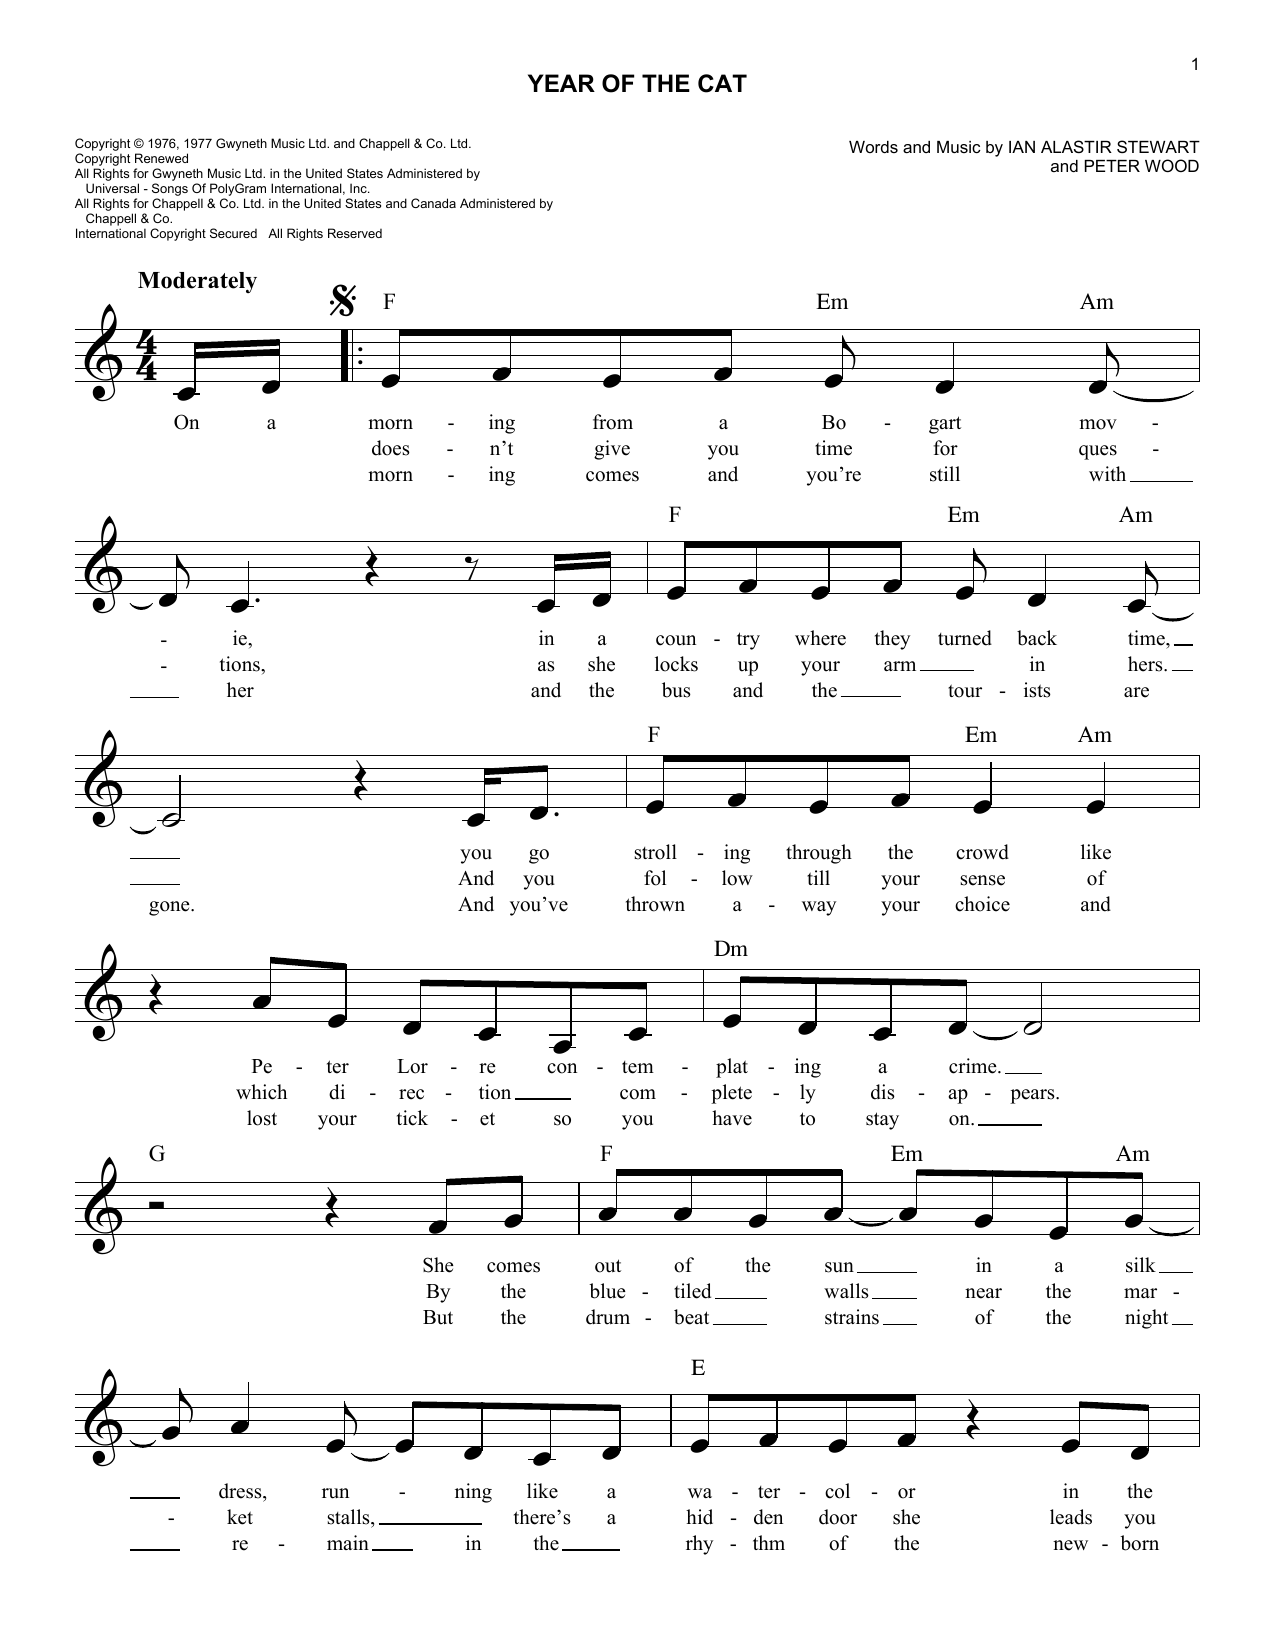 Download Peter Wood Year Of The Cat Sheet Music